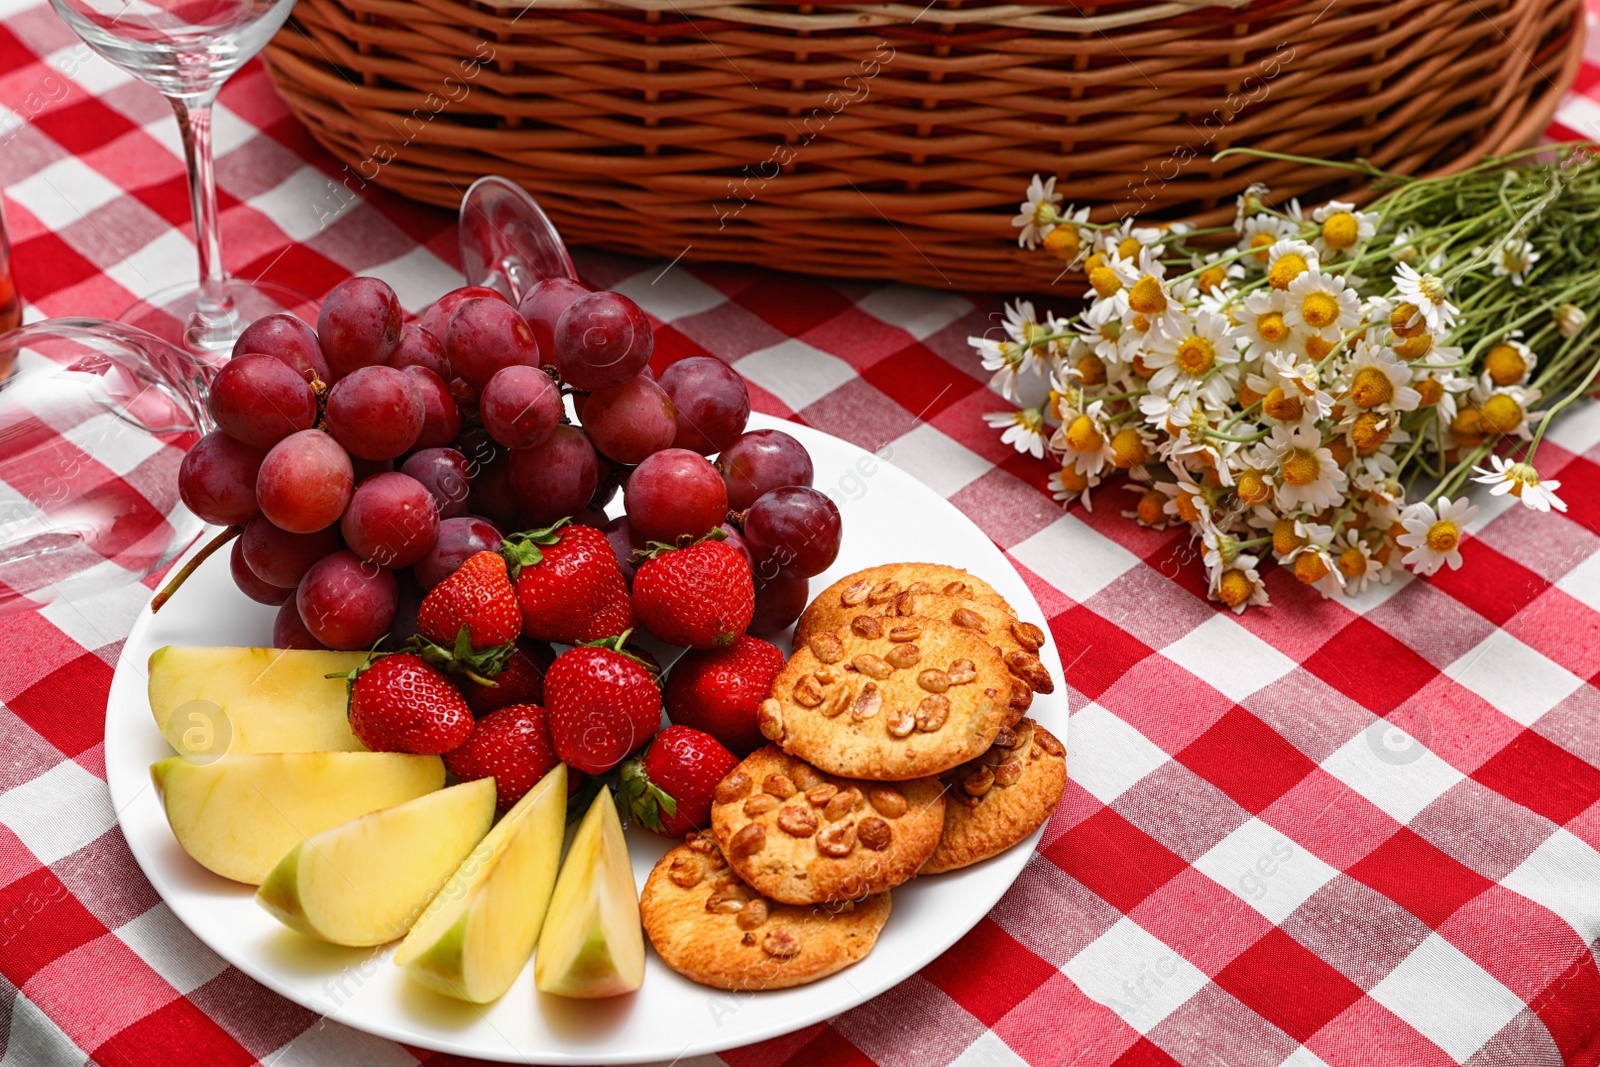 Photo of Plate with fruits and cookies near picnic basket on checkered blanket. Space for text